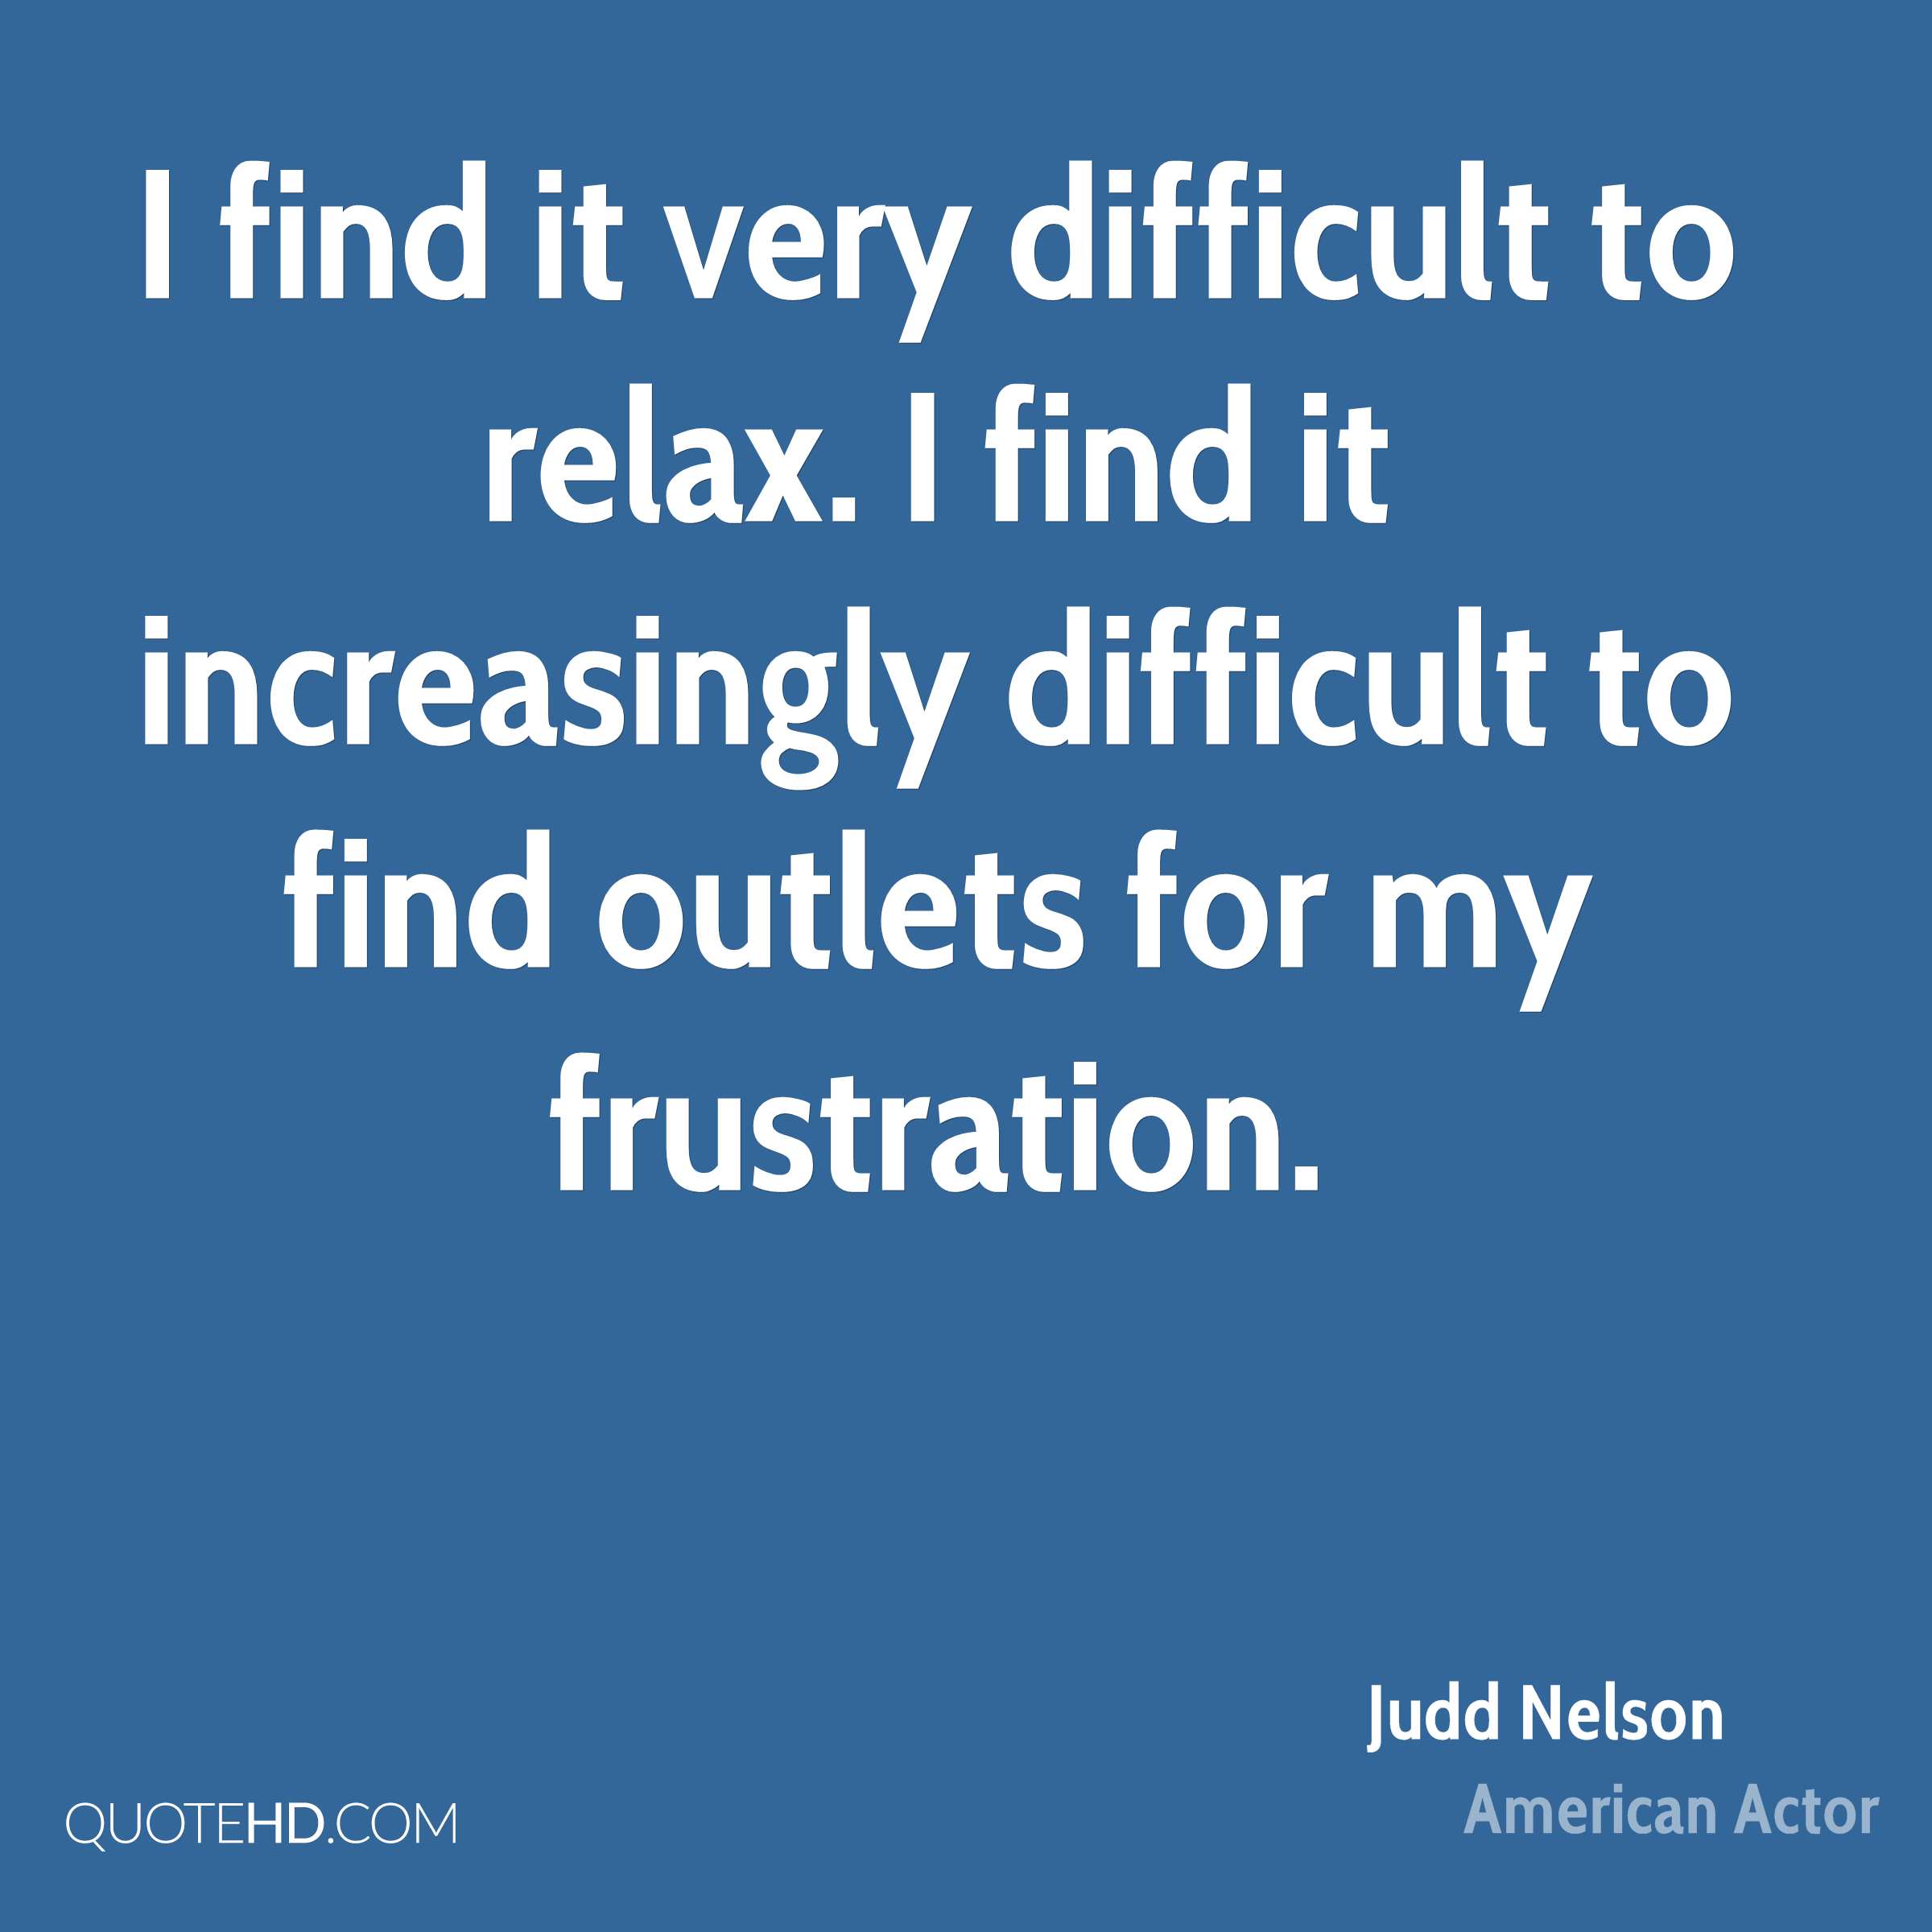 I find it very difficult to relax I find it increasingly difficult to find outlets